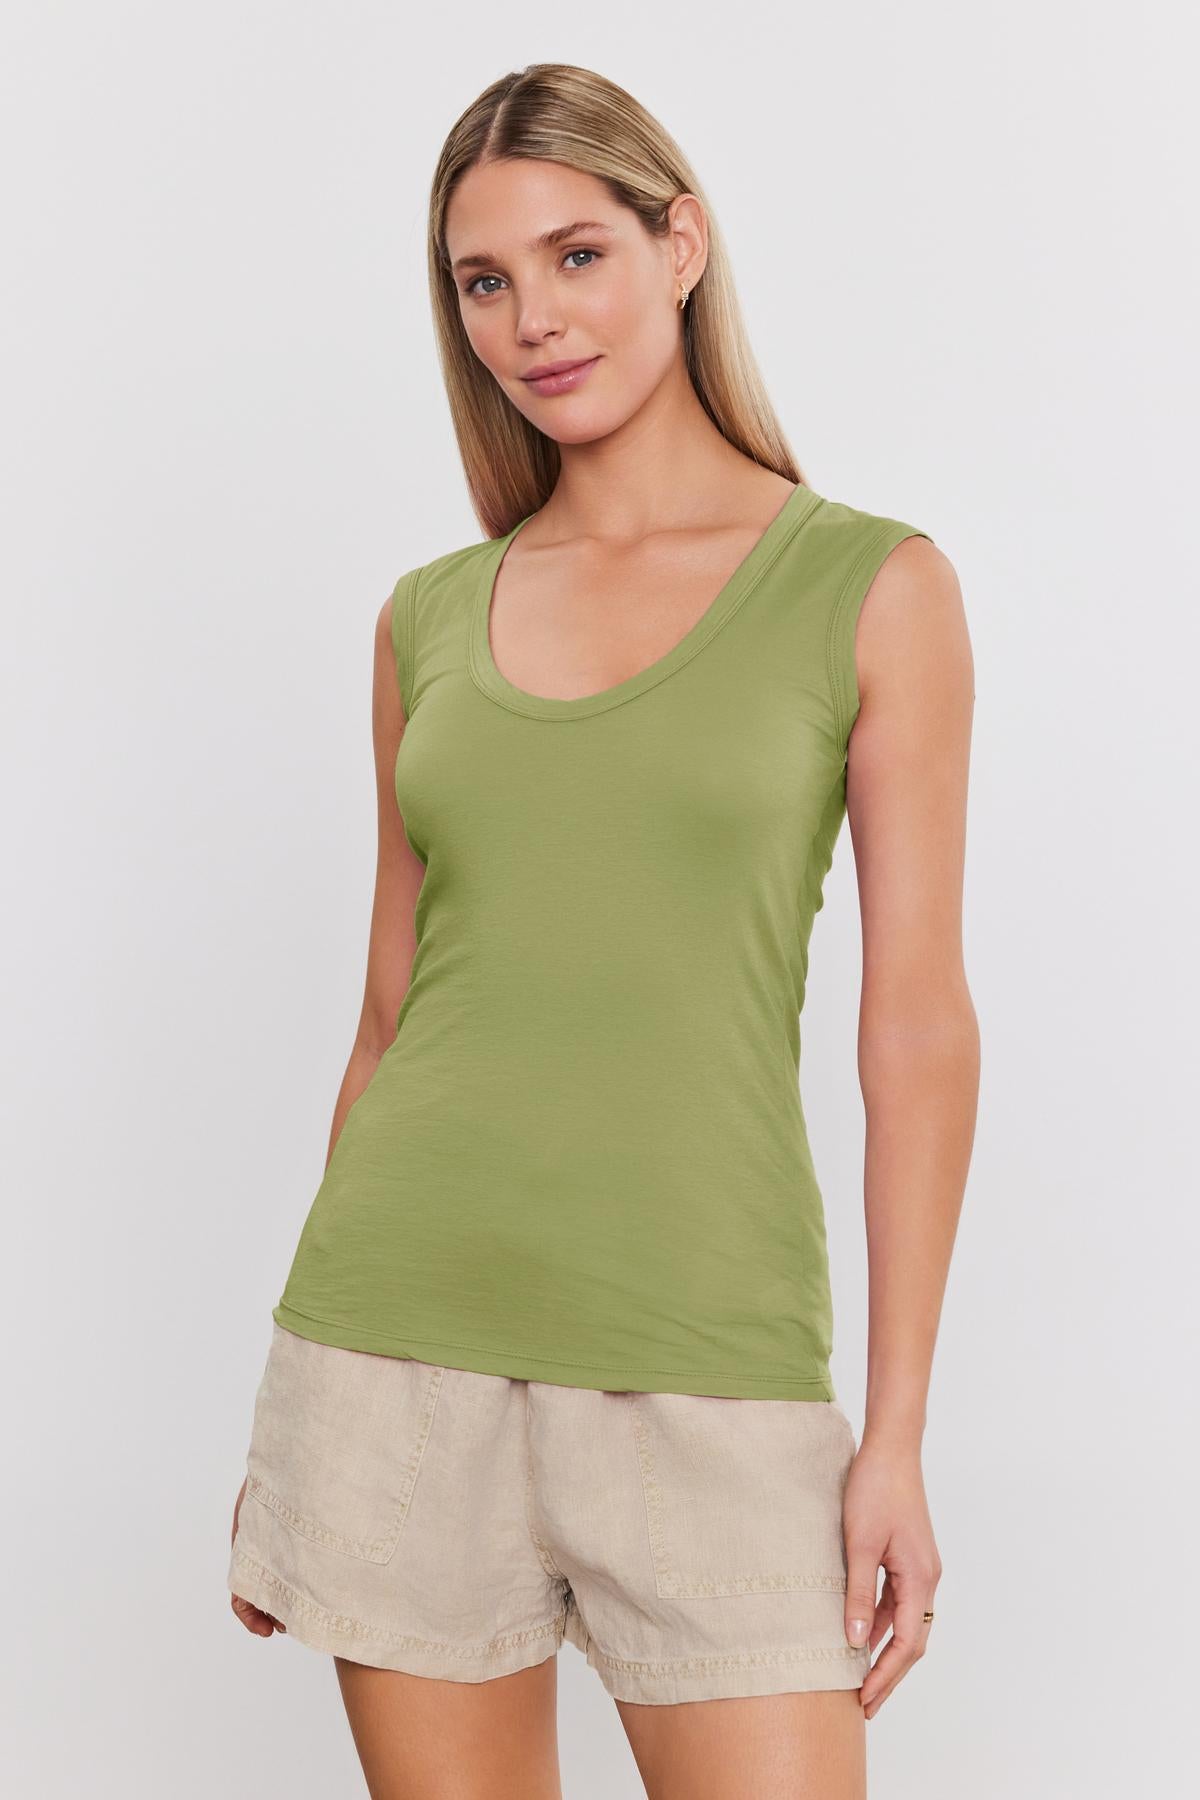 Person with long hair wearing a green ESTINA TANK TOP by Velvet by Graham & Spencer and beige shorts, standing against a white background.-37104297935041